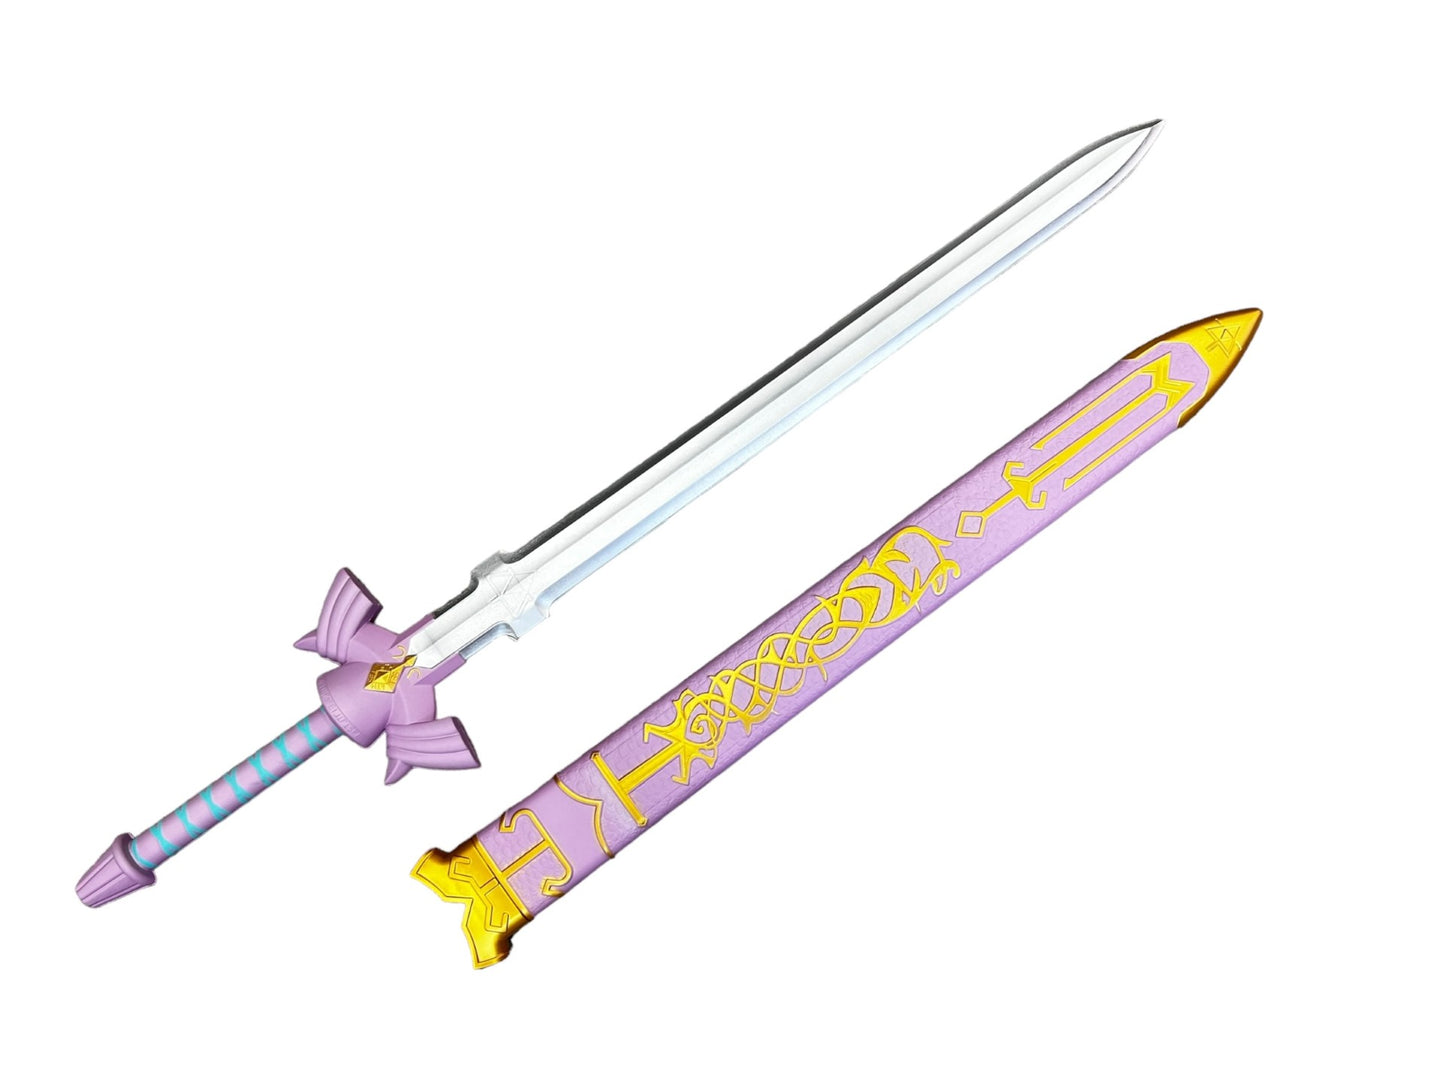 Link Sword with Scabbard LG